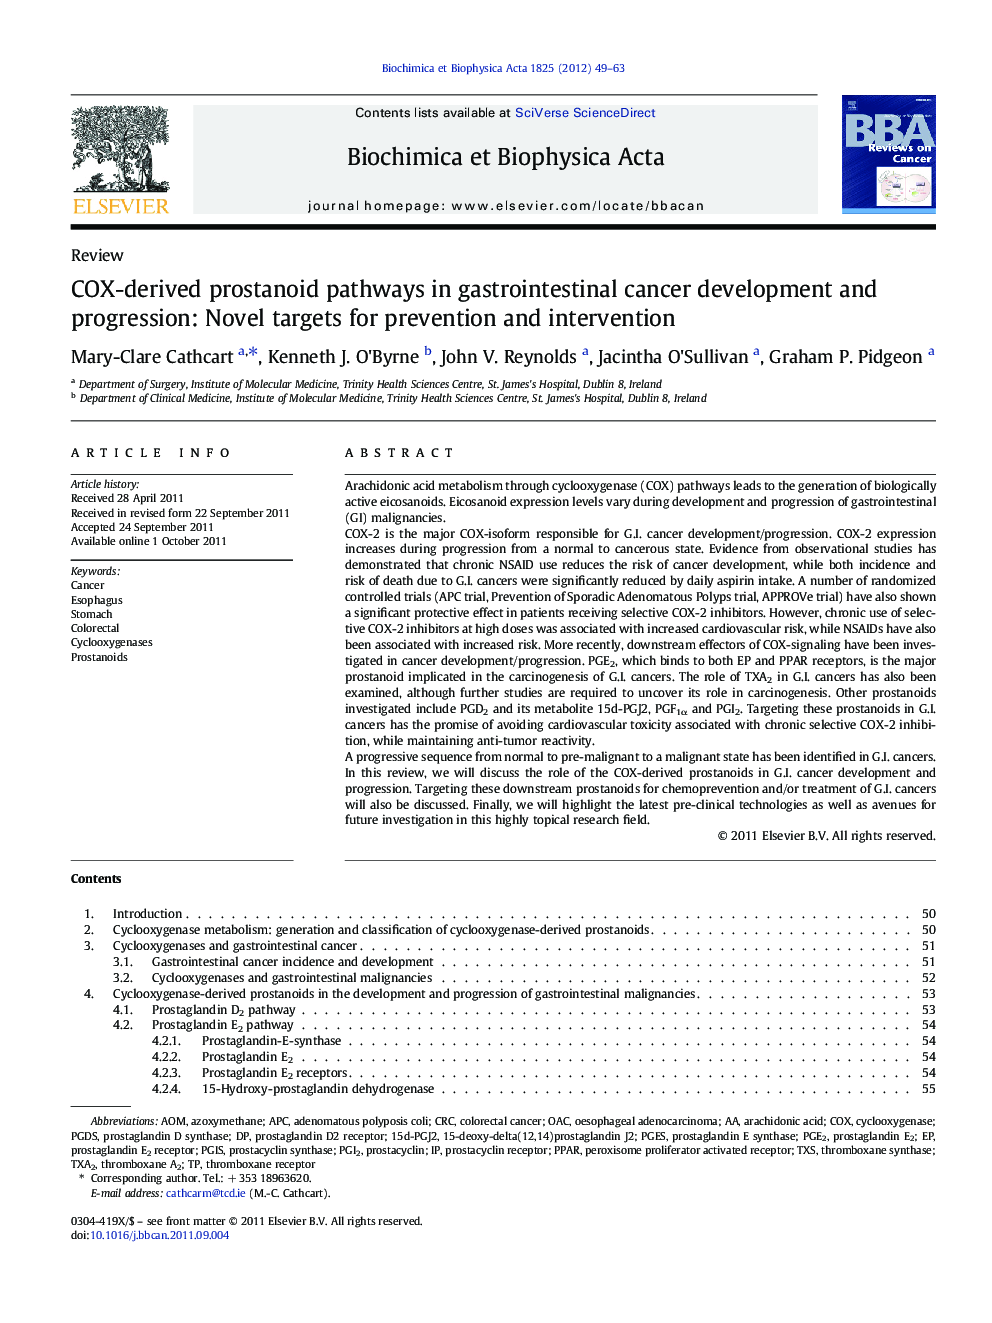 COX-derived prostanoid pathways in gastrointestinal cancer development and progression: Novel targets for prevention and intervention